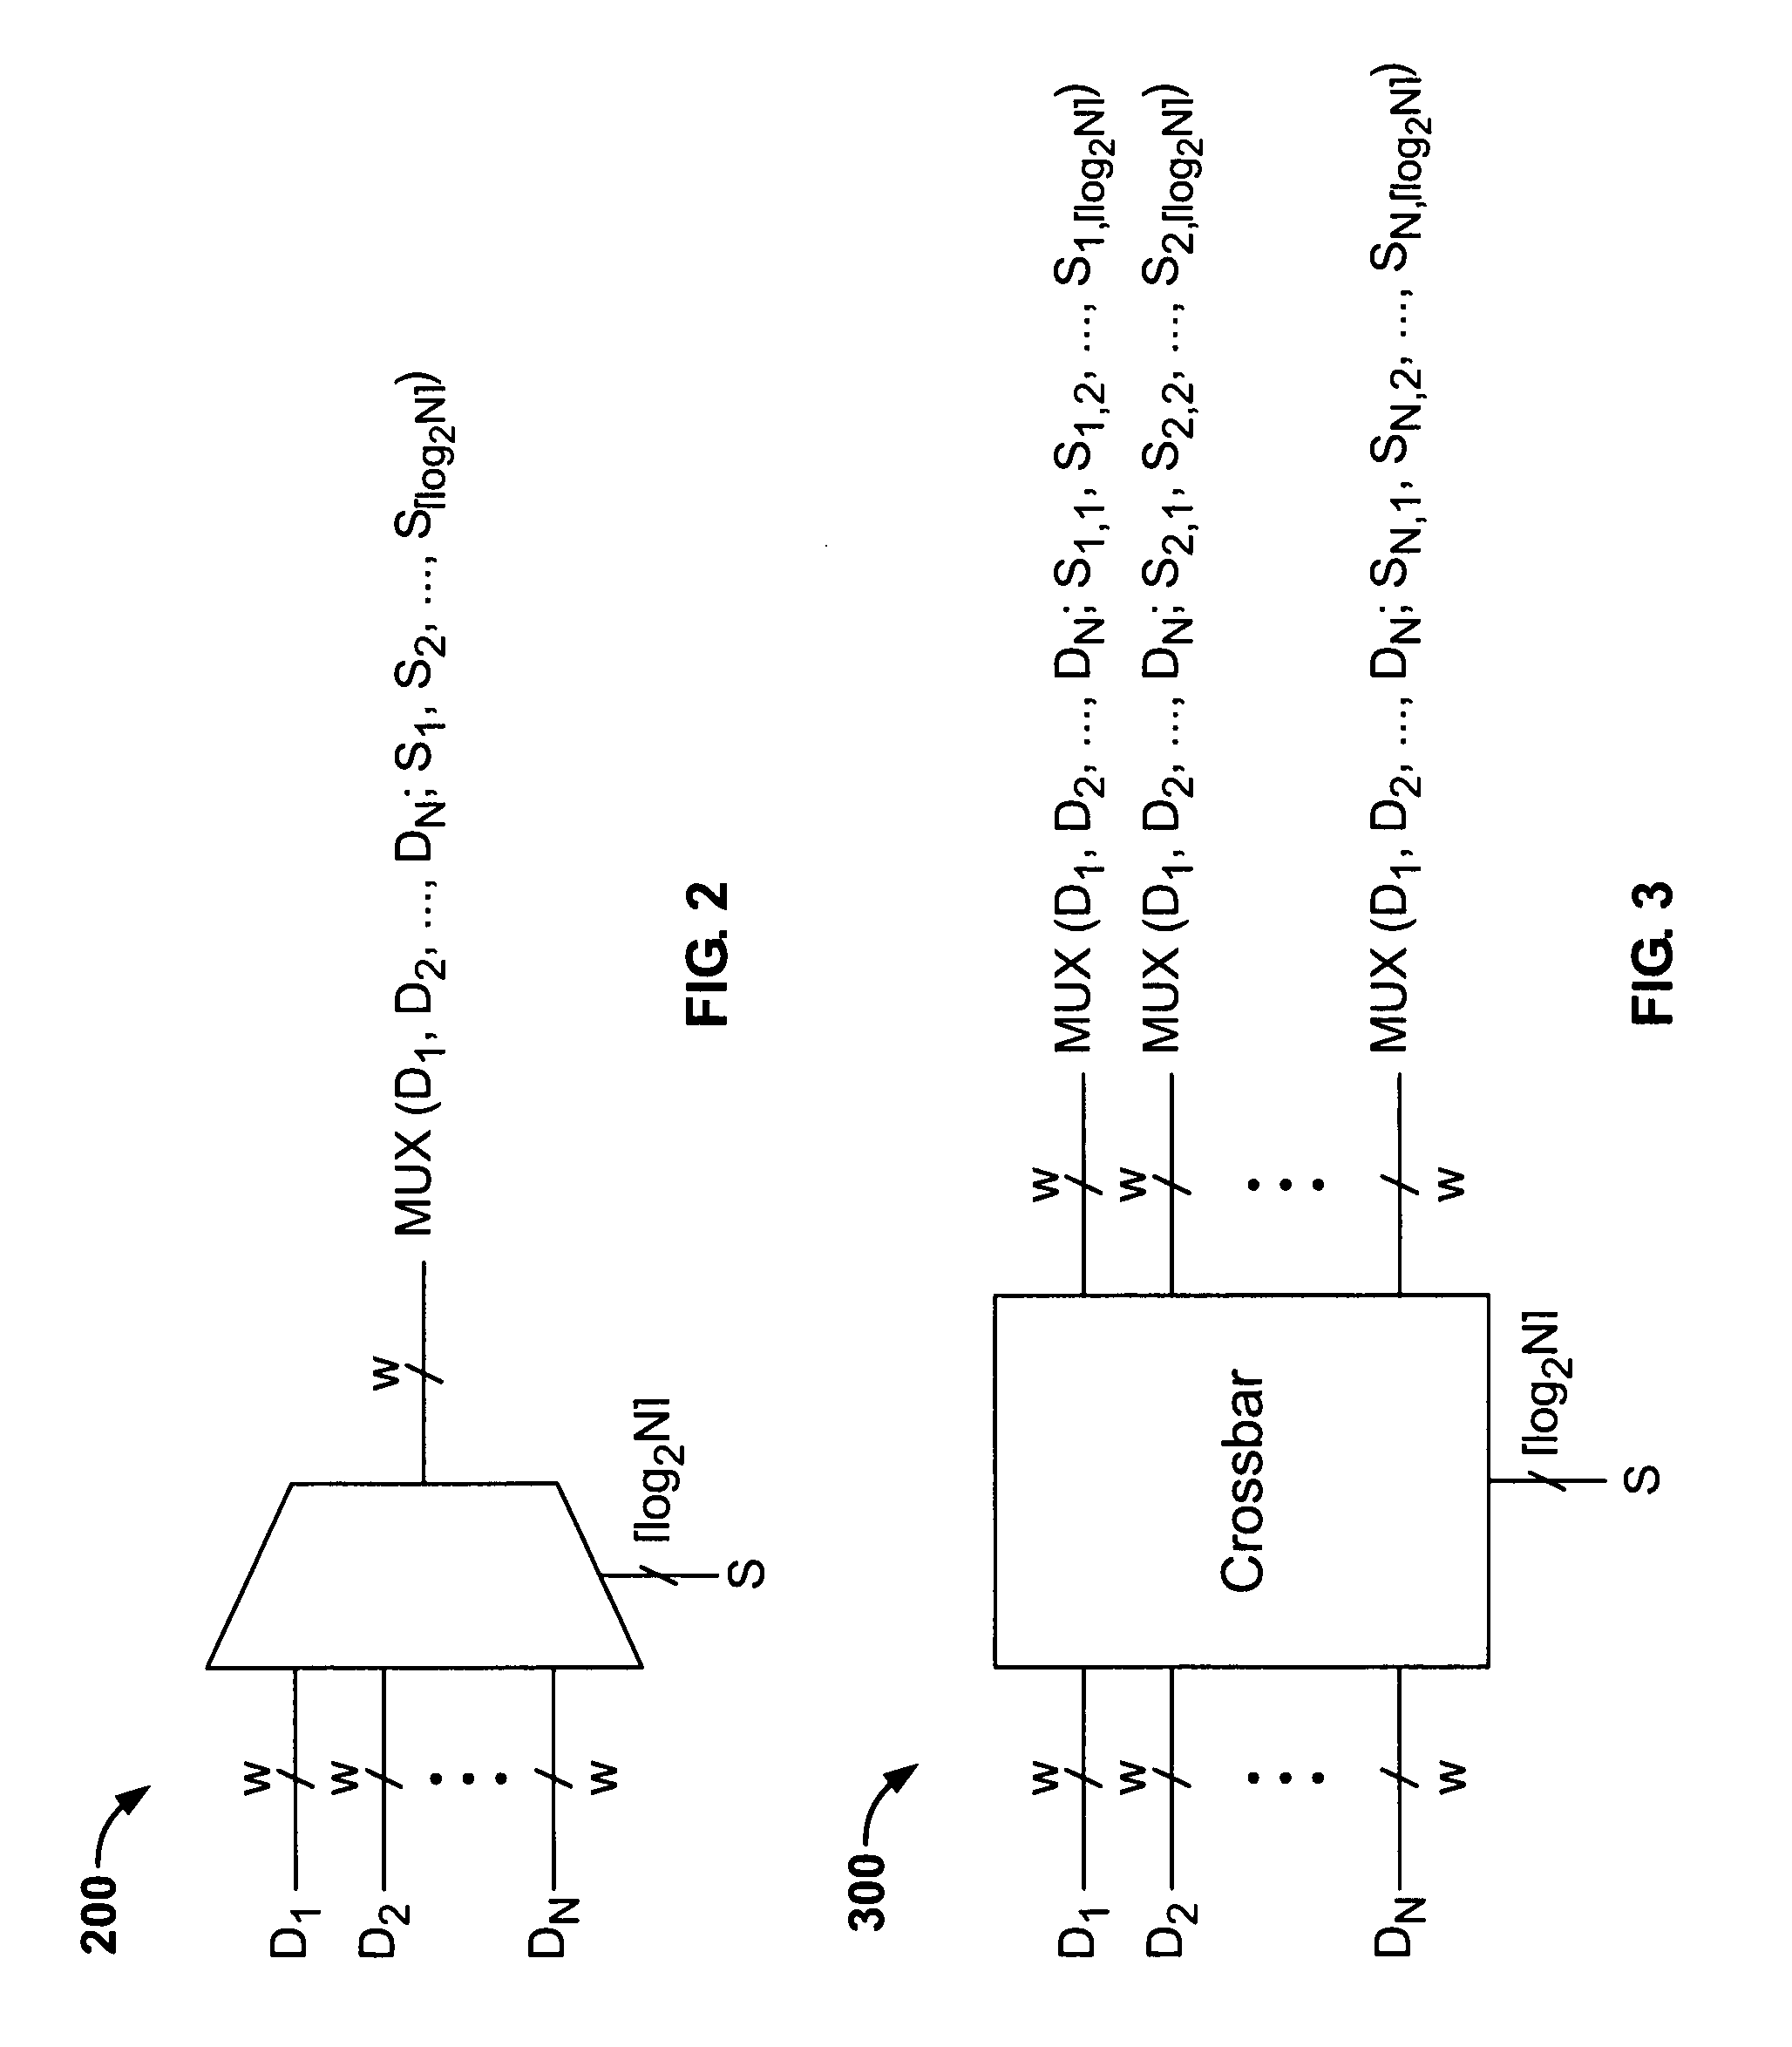 Dedicated crossbar and barrel shifter block on programmable logic resources